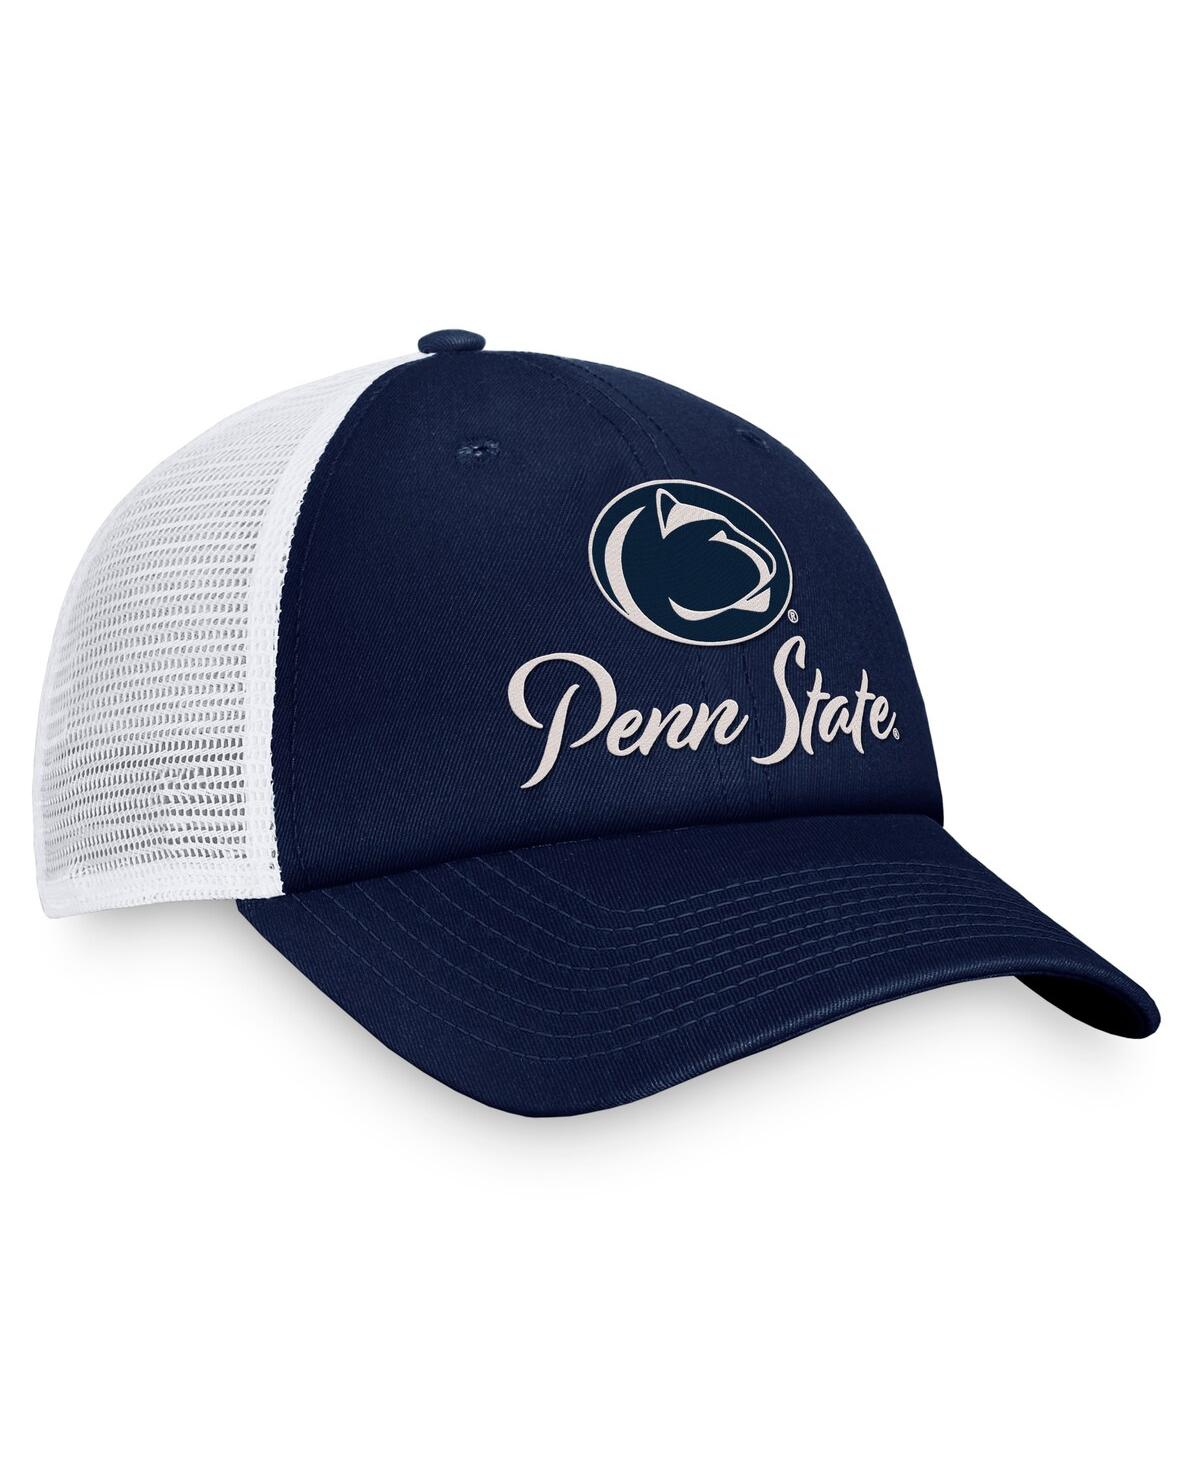 Shop Top Of The World Women's  Navy, White Penn State Nittany Lions Charm Trucker Adjustable Hat In Navy,white